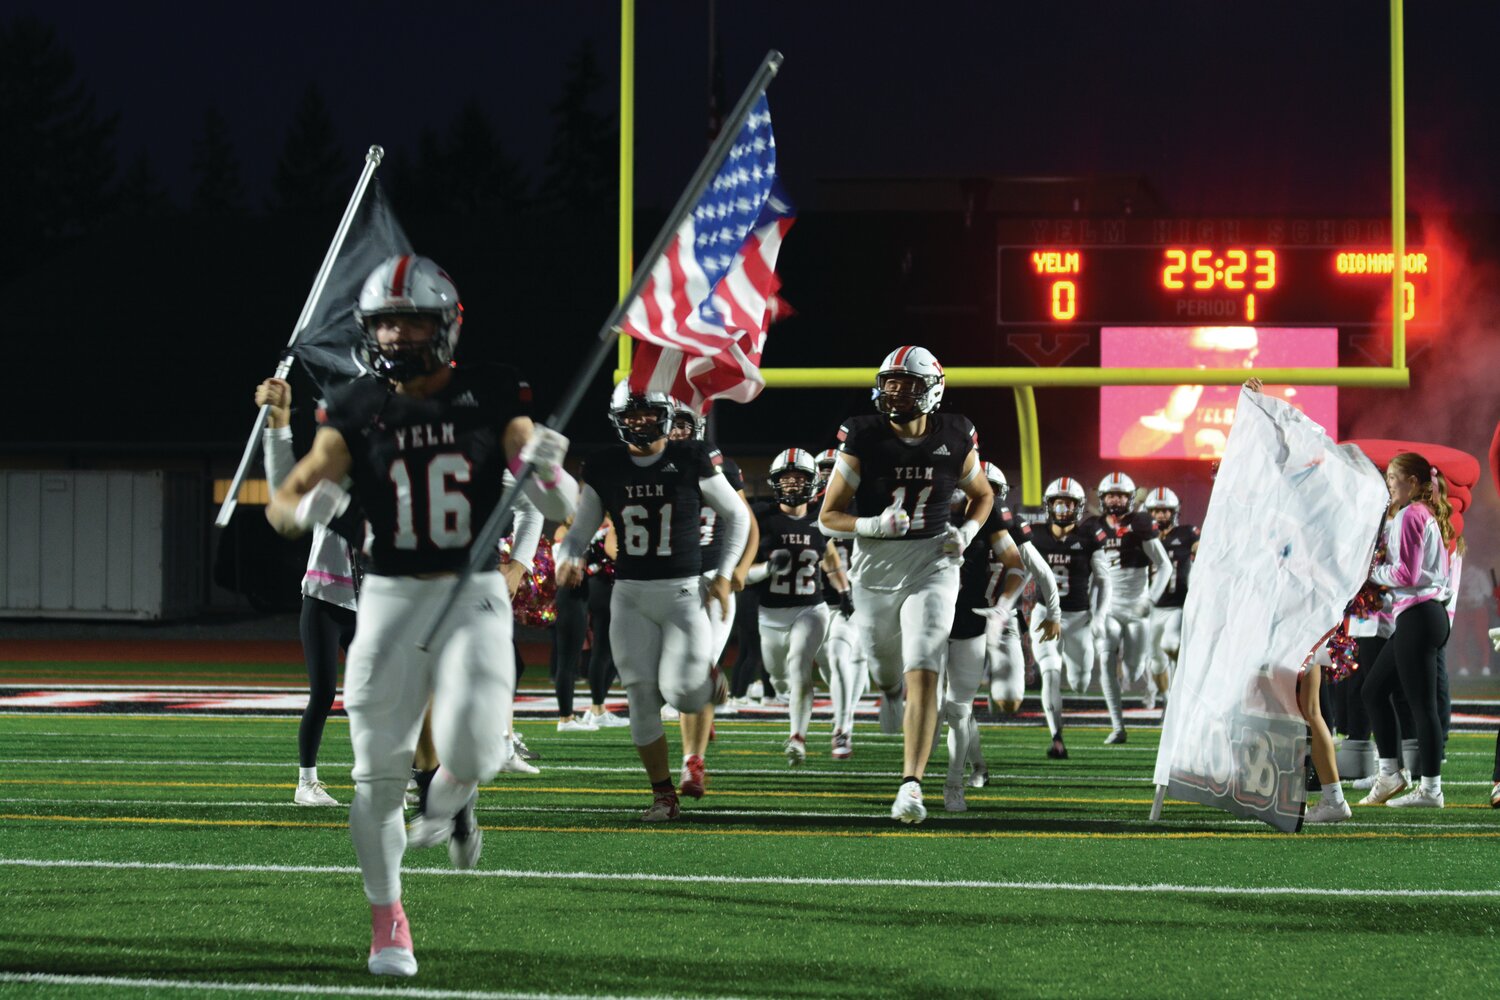 Led by junior linebacker Nathan Ford, the Yelm Tornados football team makes its way to the field for its Oct. 27 SSC championship matchup against the Gig Harbor Tides.